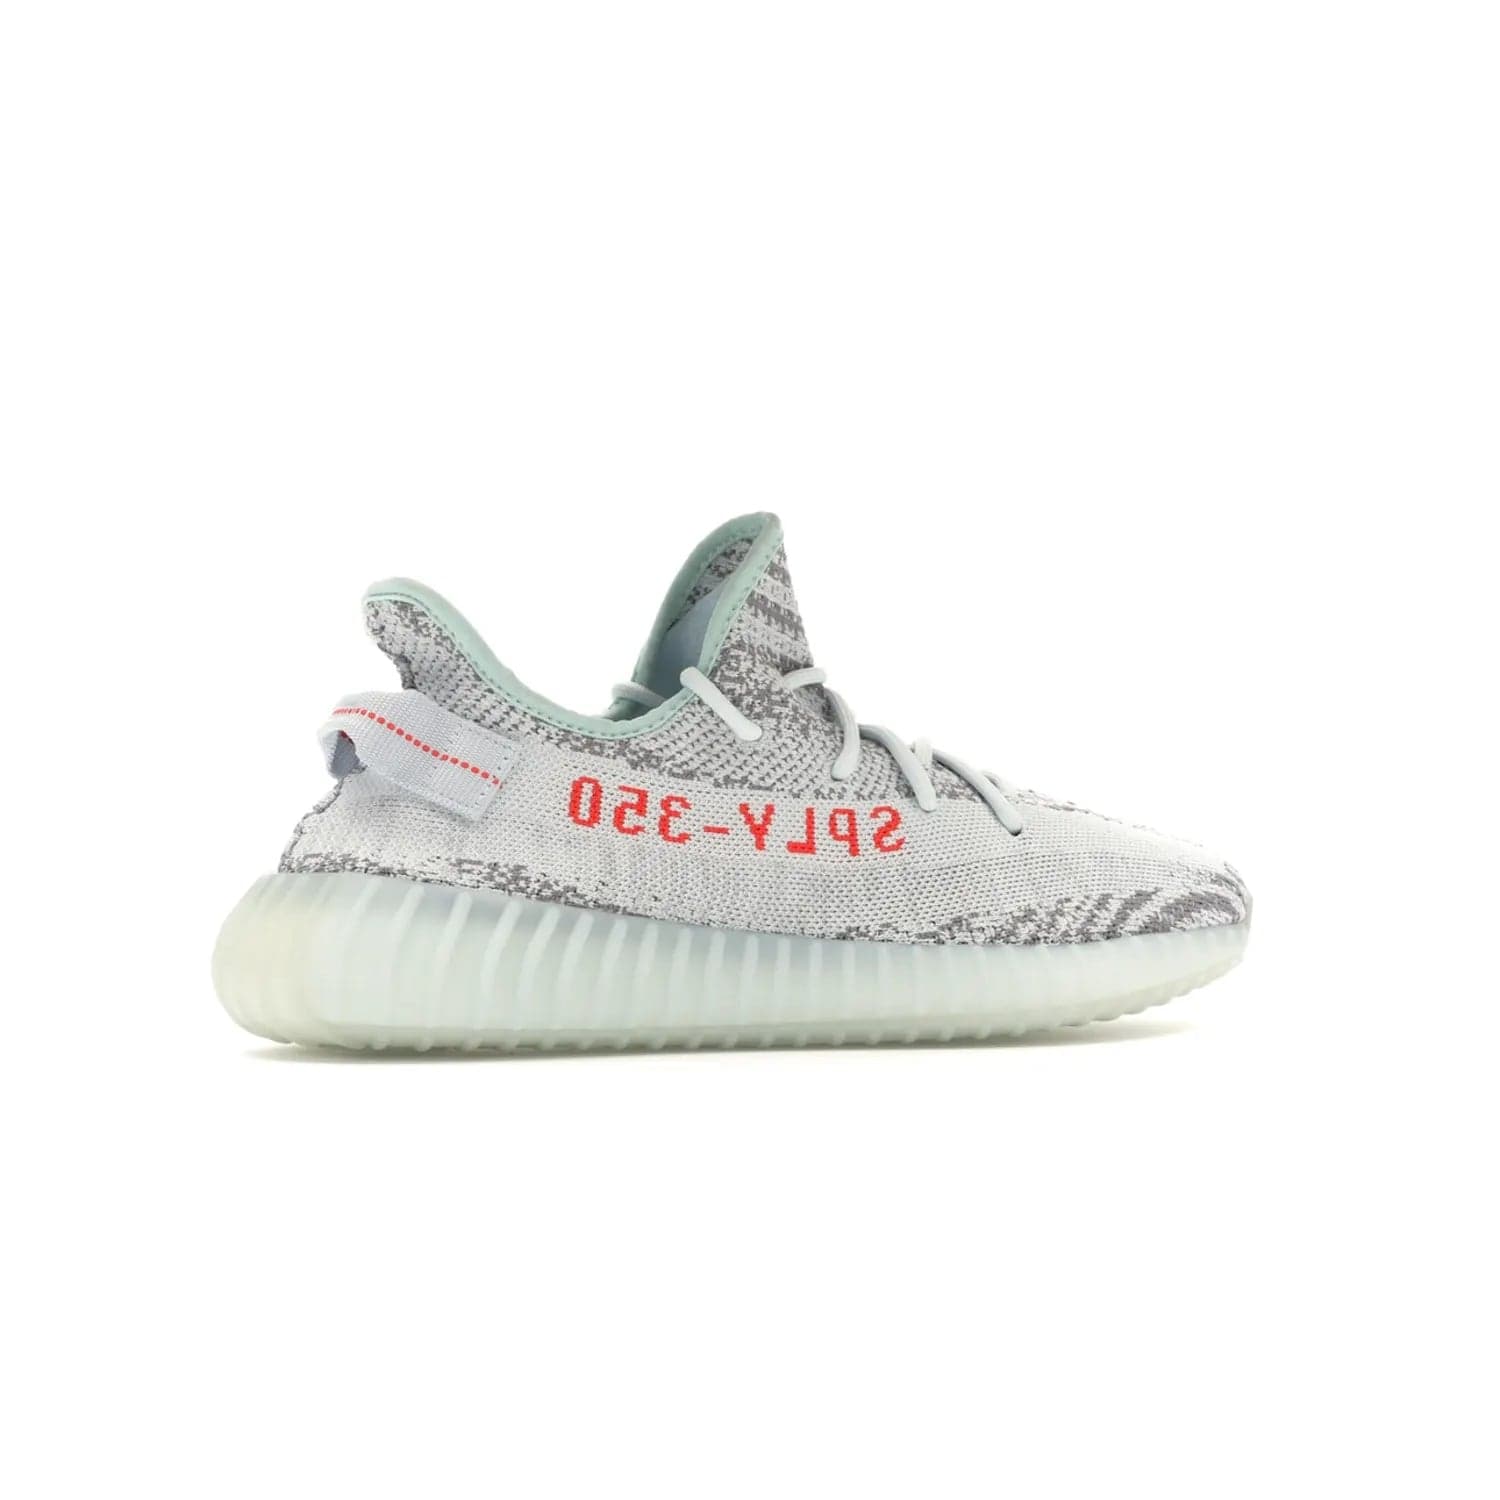 adidas Yeezy Boost 350 V2 Blue Tint - Image 35 - Only at www.BallersClubKickz.com - The adidas Yeezy Boost 350 V2 Blue Tint merges fashion and functionality with its Primeknit upper and Boost sole. Released in December 2017, this luxurious sneaker is perfect for making a stylish statement.